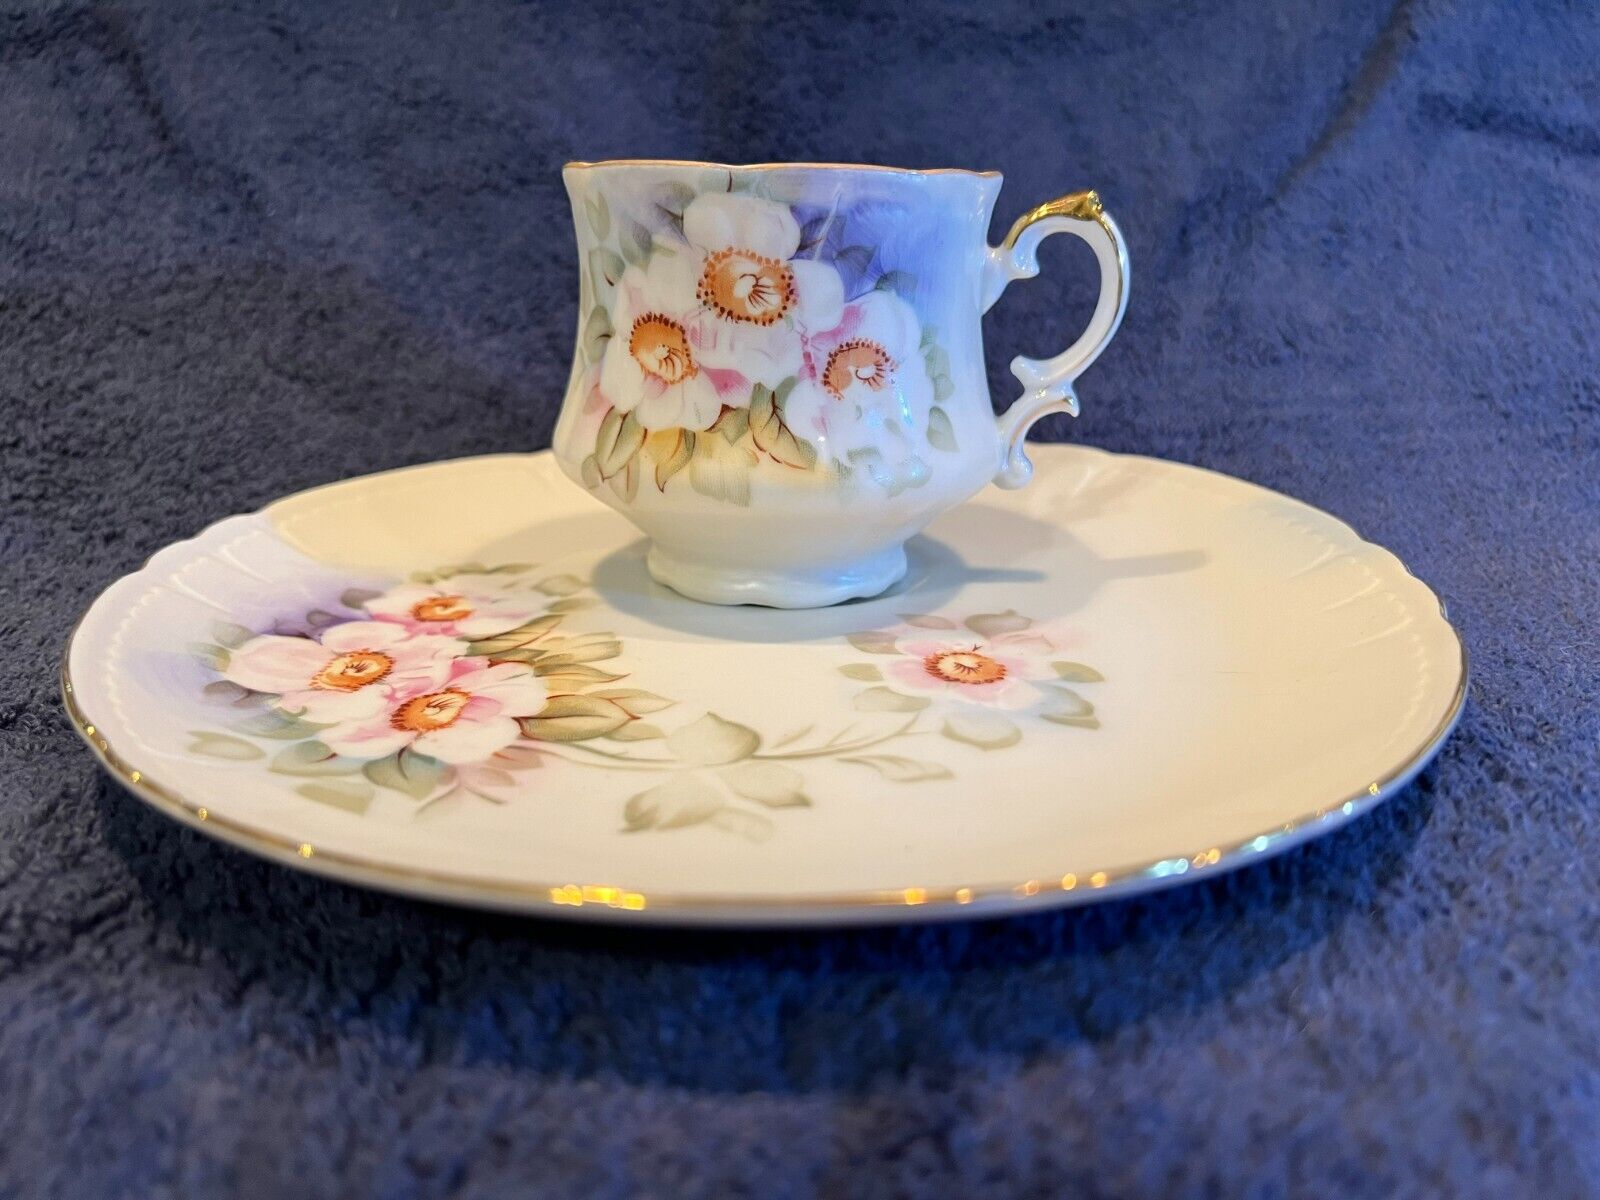 Vintage Lefton Magnolia China Snack Plate & Cup, Made in Japan